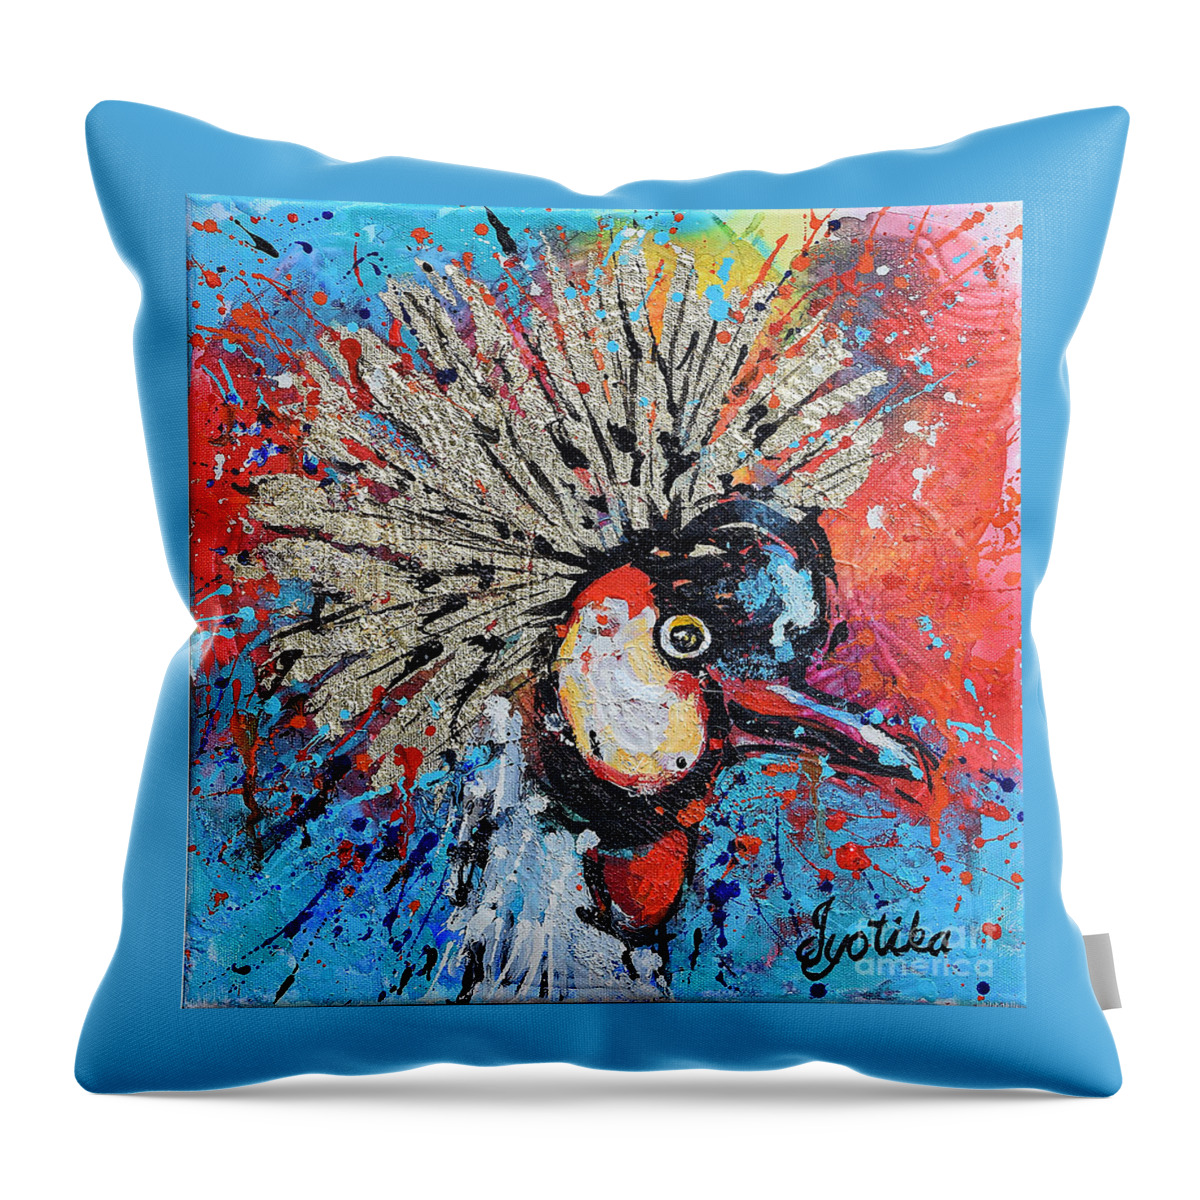 Grey Crowned Crane Throw Pillow featuring the painting The Crowned Crane by Jyotika Shroff